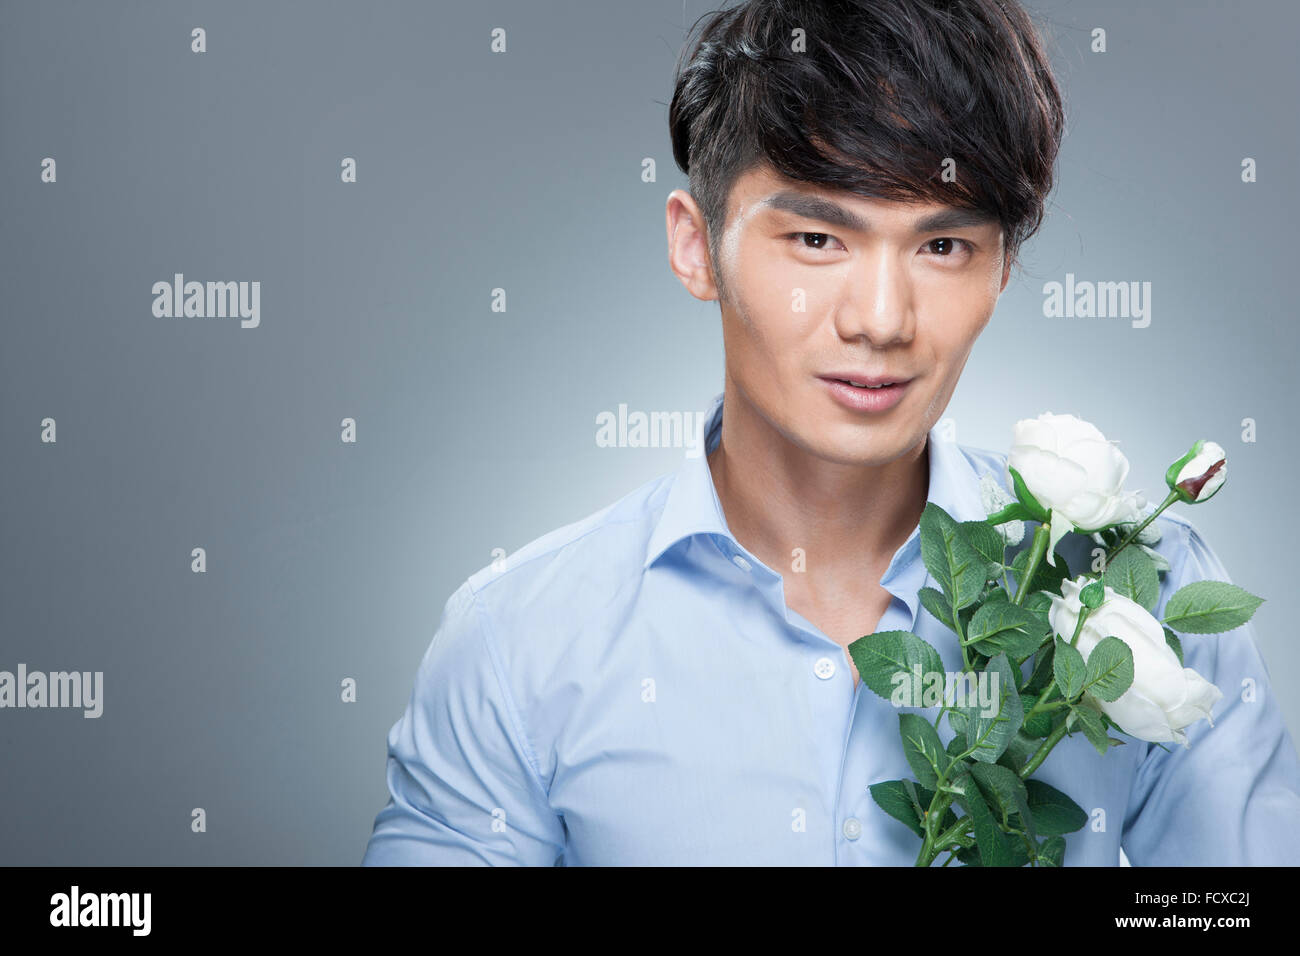 Man in blue shirt holding white flowers and staring forward Stock Photo